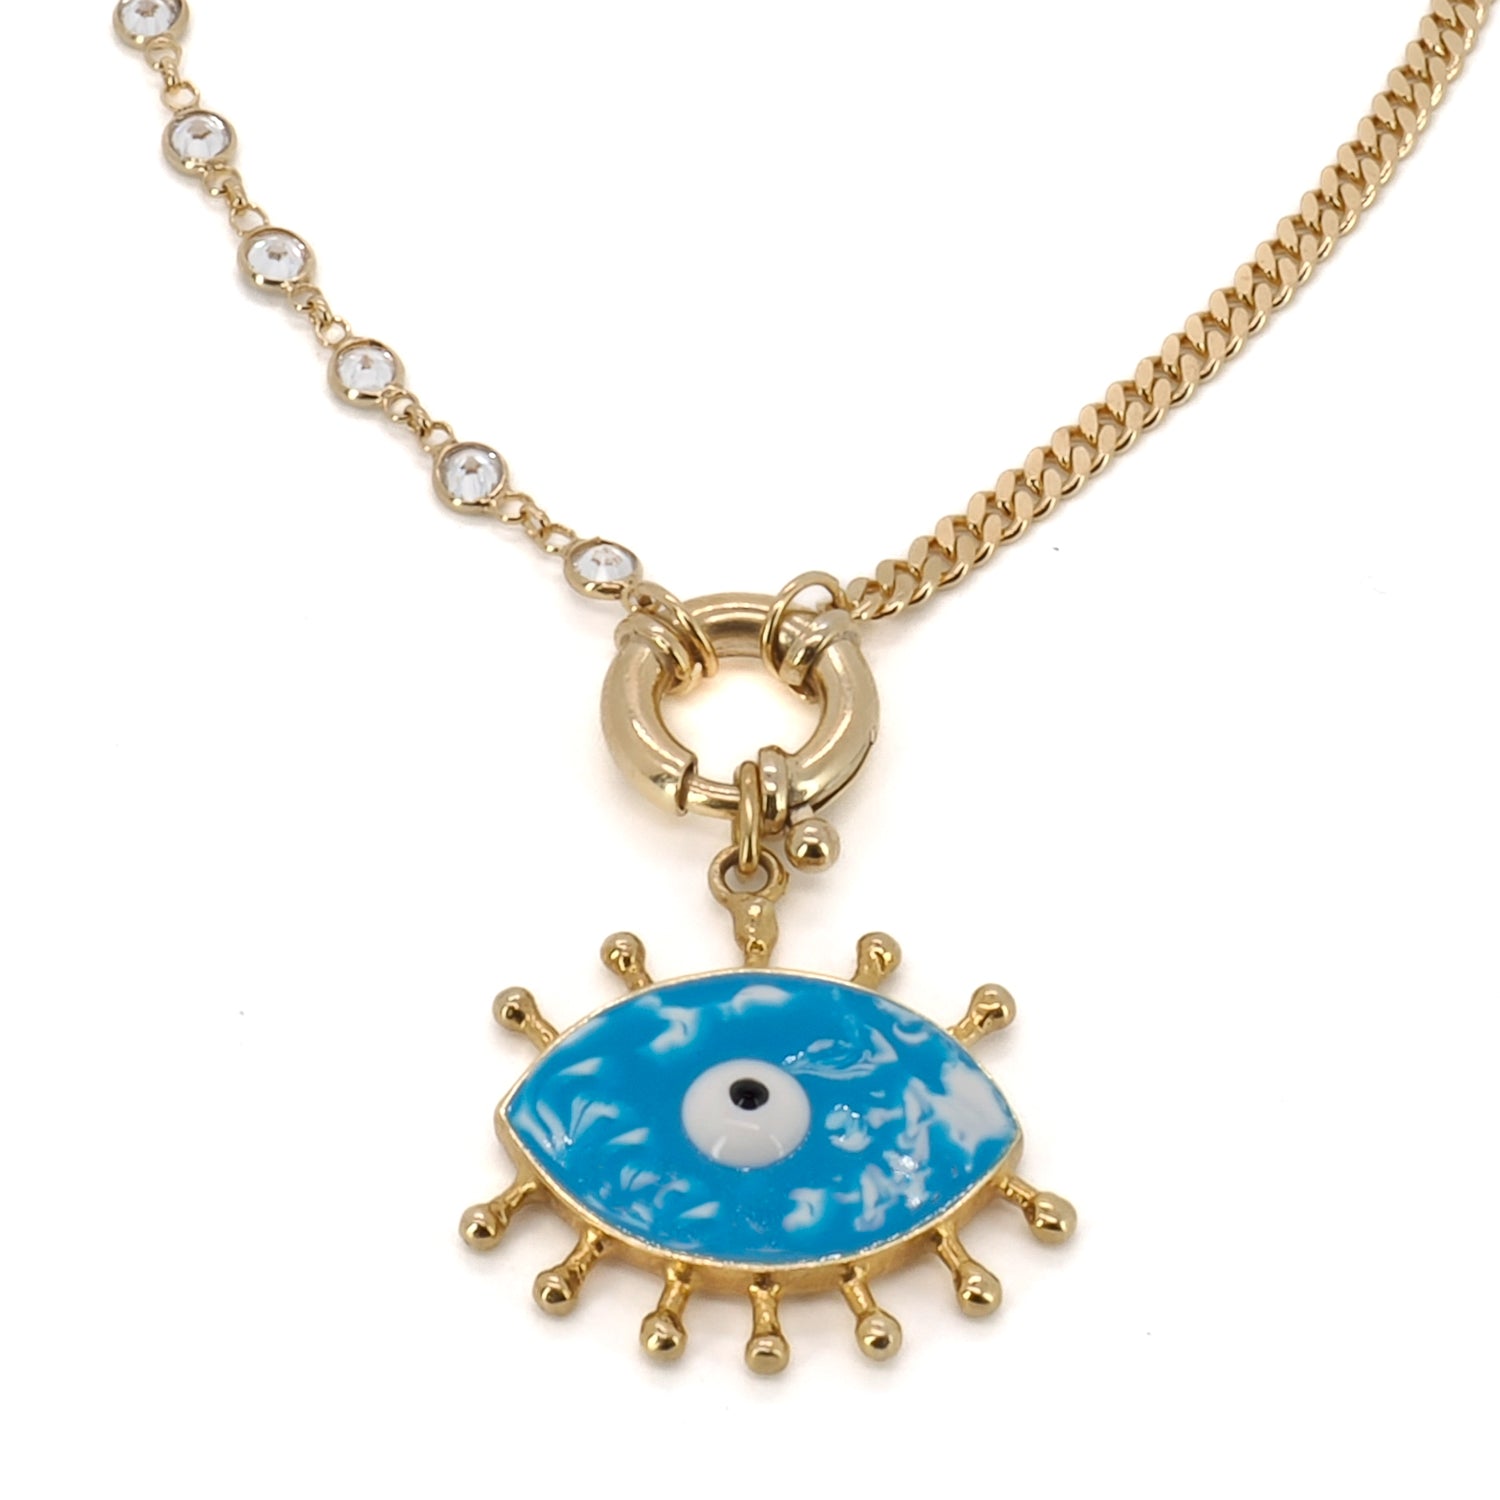 The elegant Turquoise Evil Eye Chain Necklace, featuring a 925 solid silver chain with an 18K gold vermeil and blue enamel Evil Eye pendant.